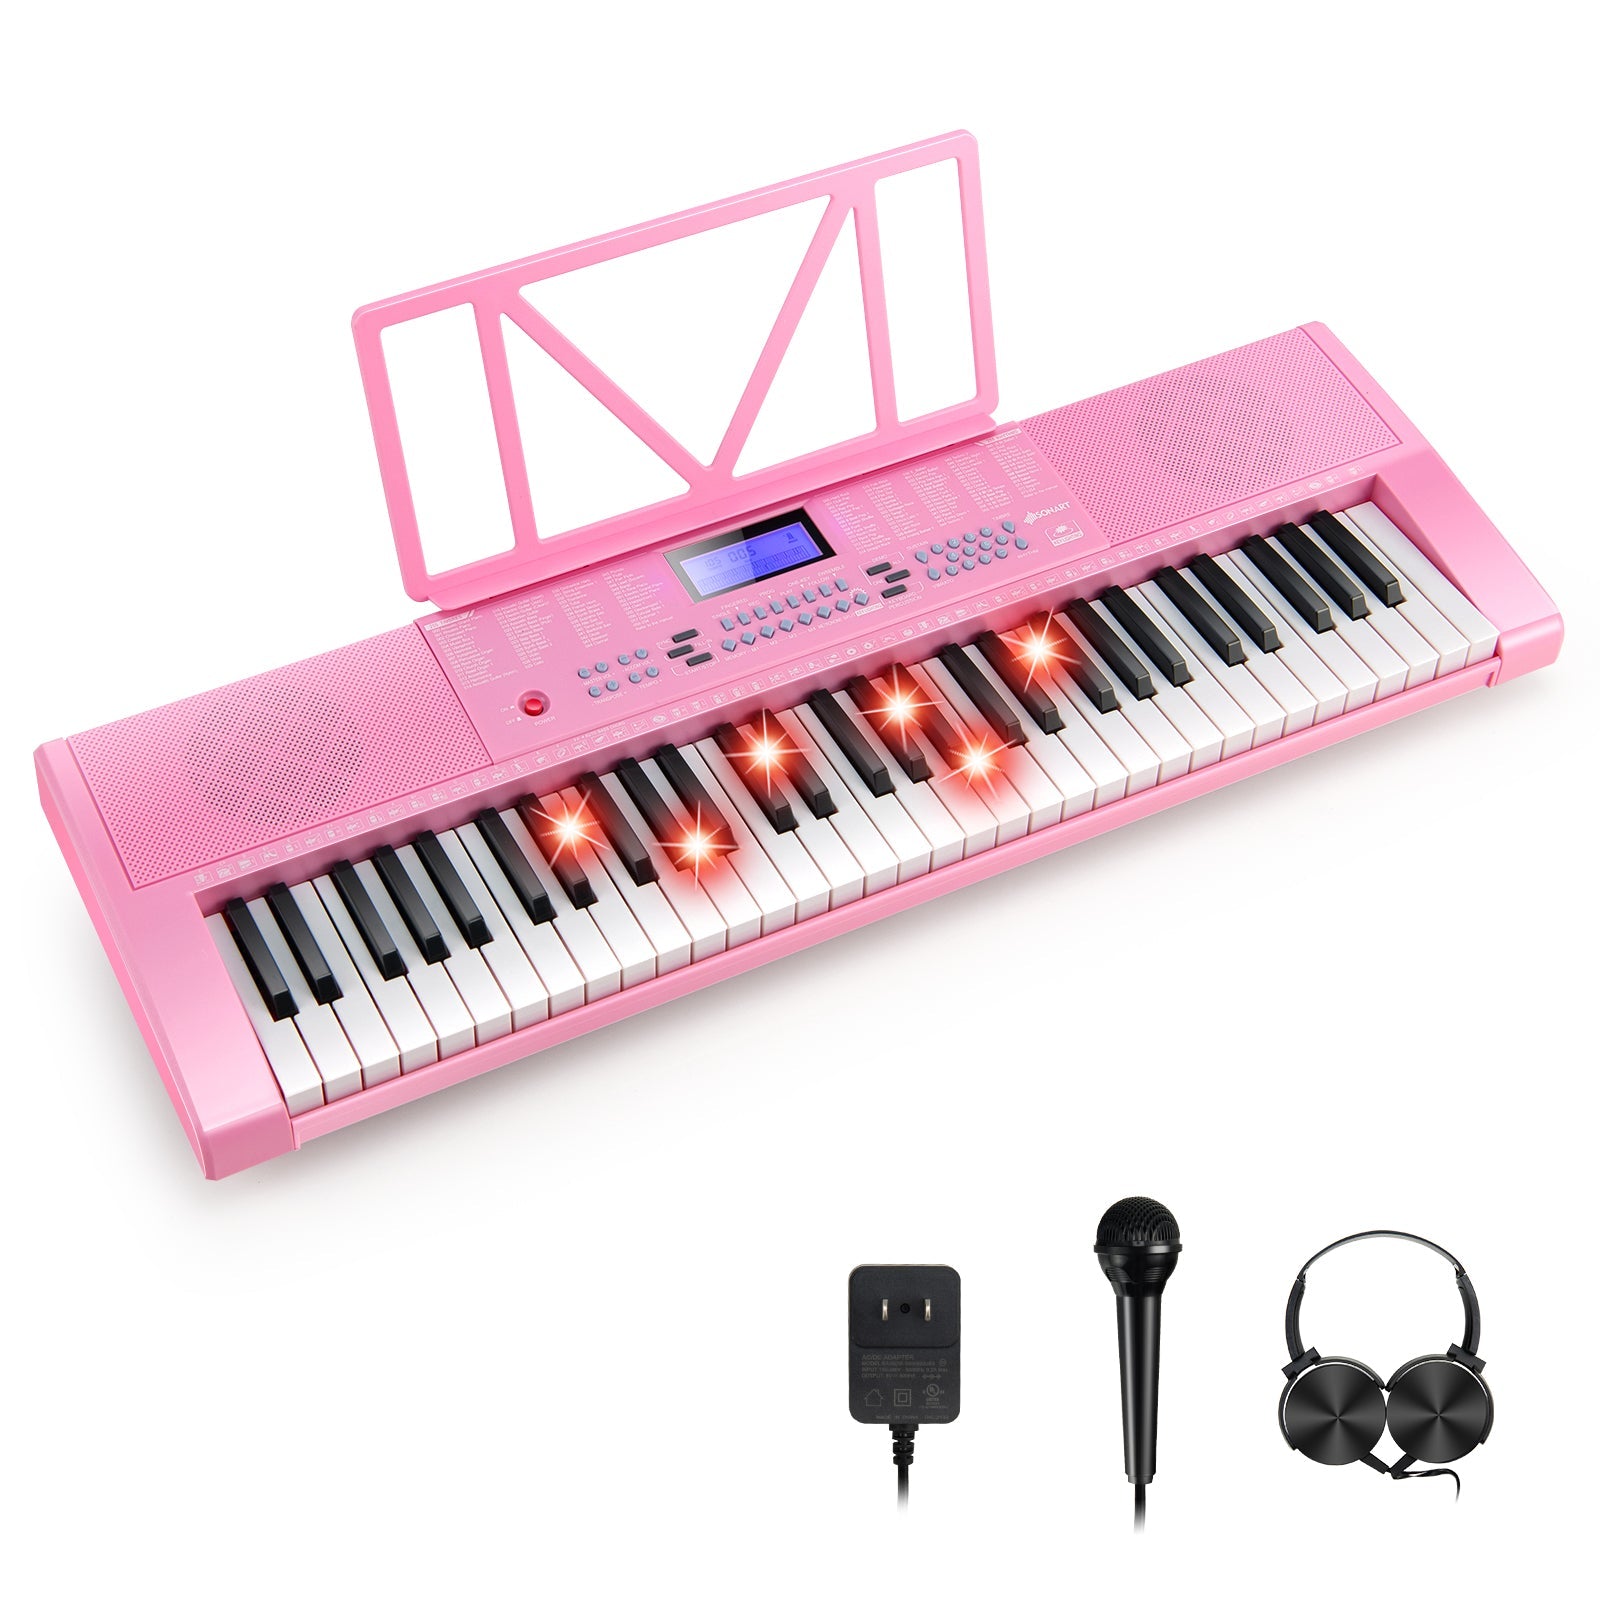 Play Beautiful Tunes: 61-Key Pink Electric Piano with Music Stand, Portable and Digital